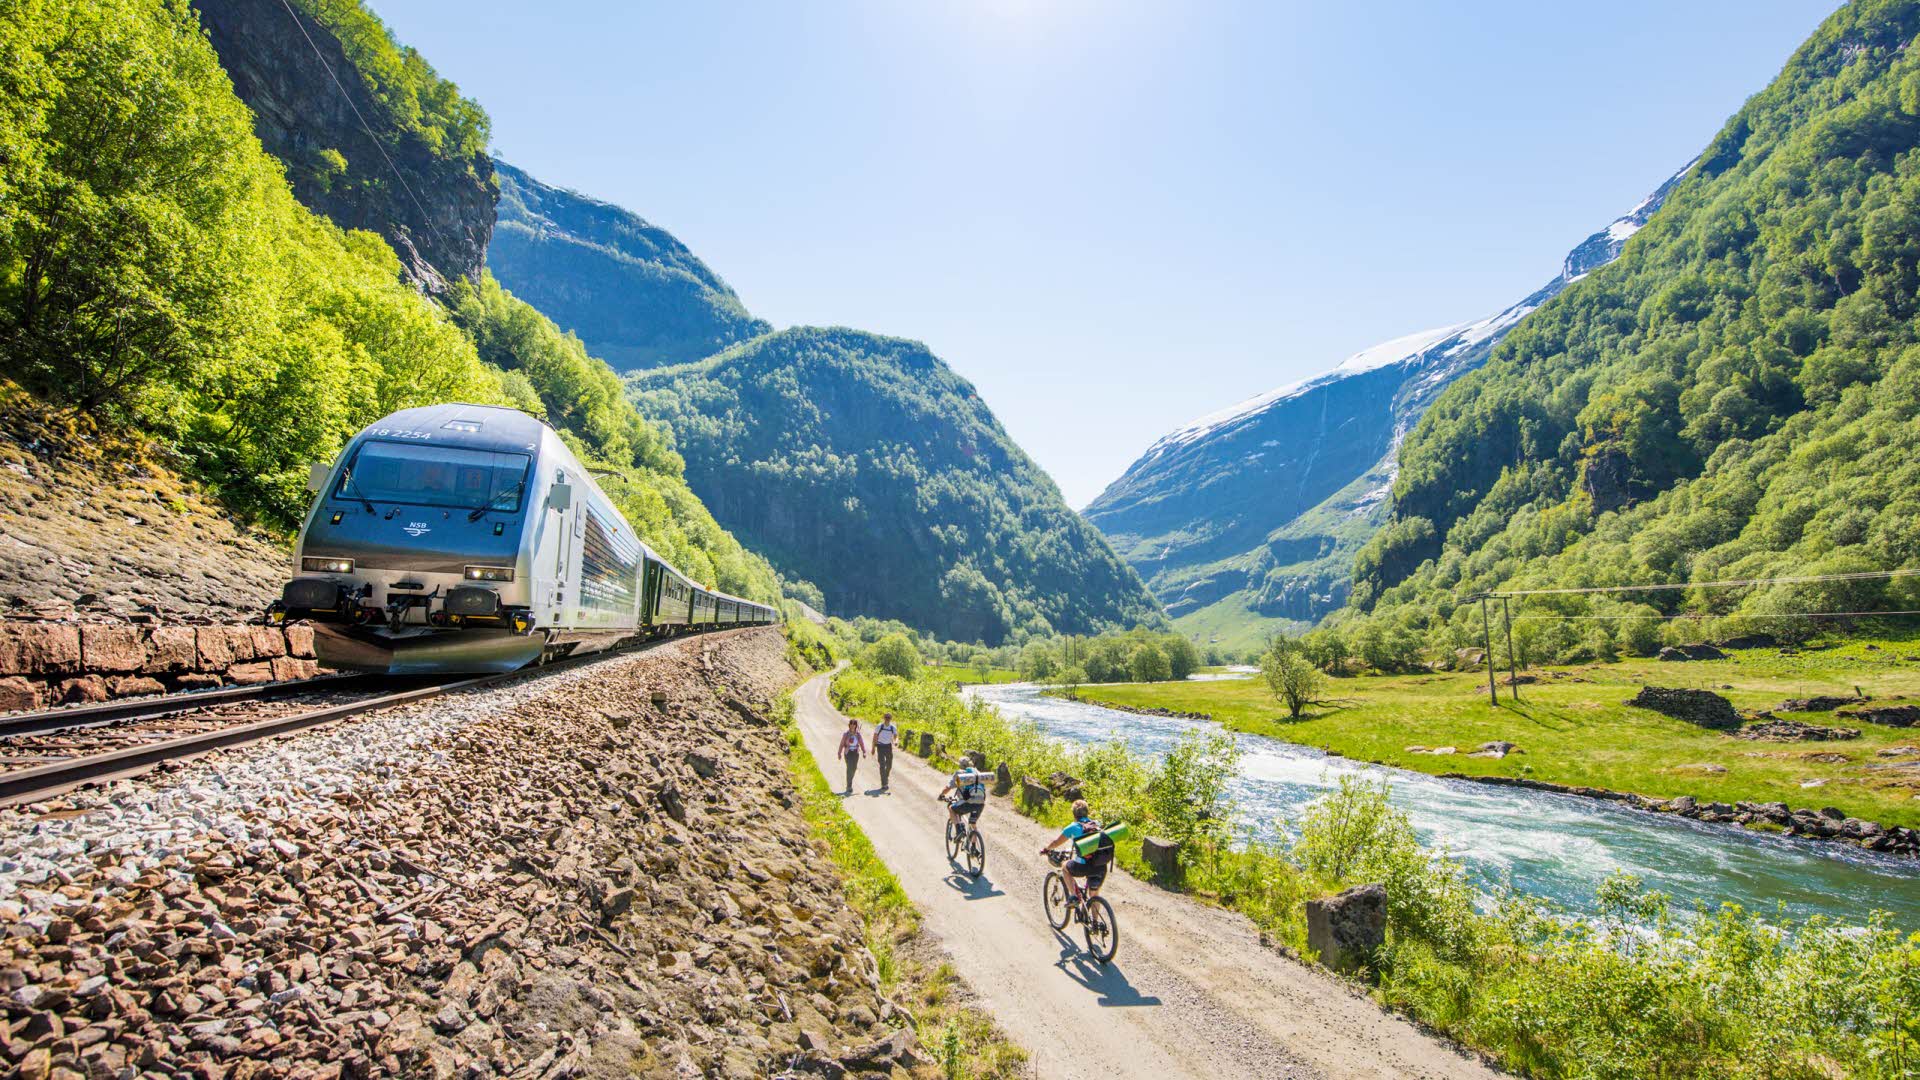 Pedestrians and cyclists travelling along the Flåmselv river on a warm summer day as the Flåm Railway passes by